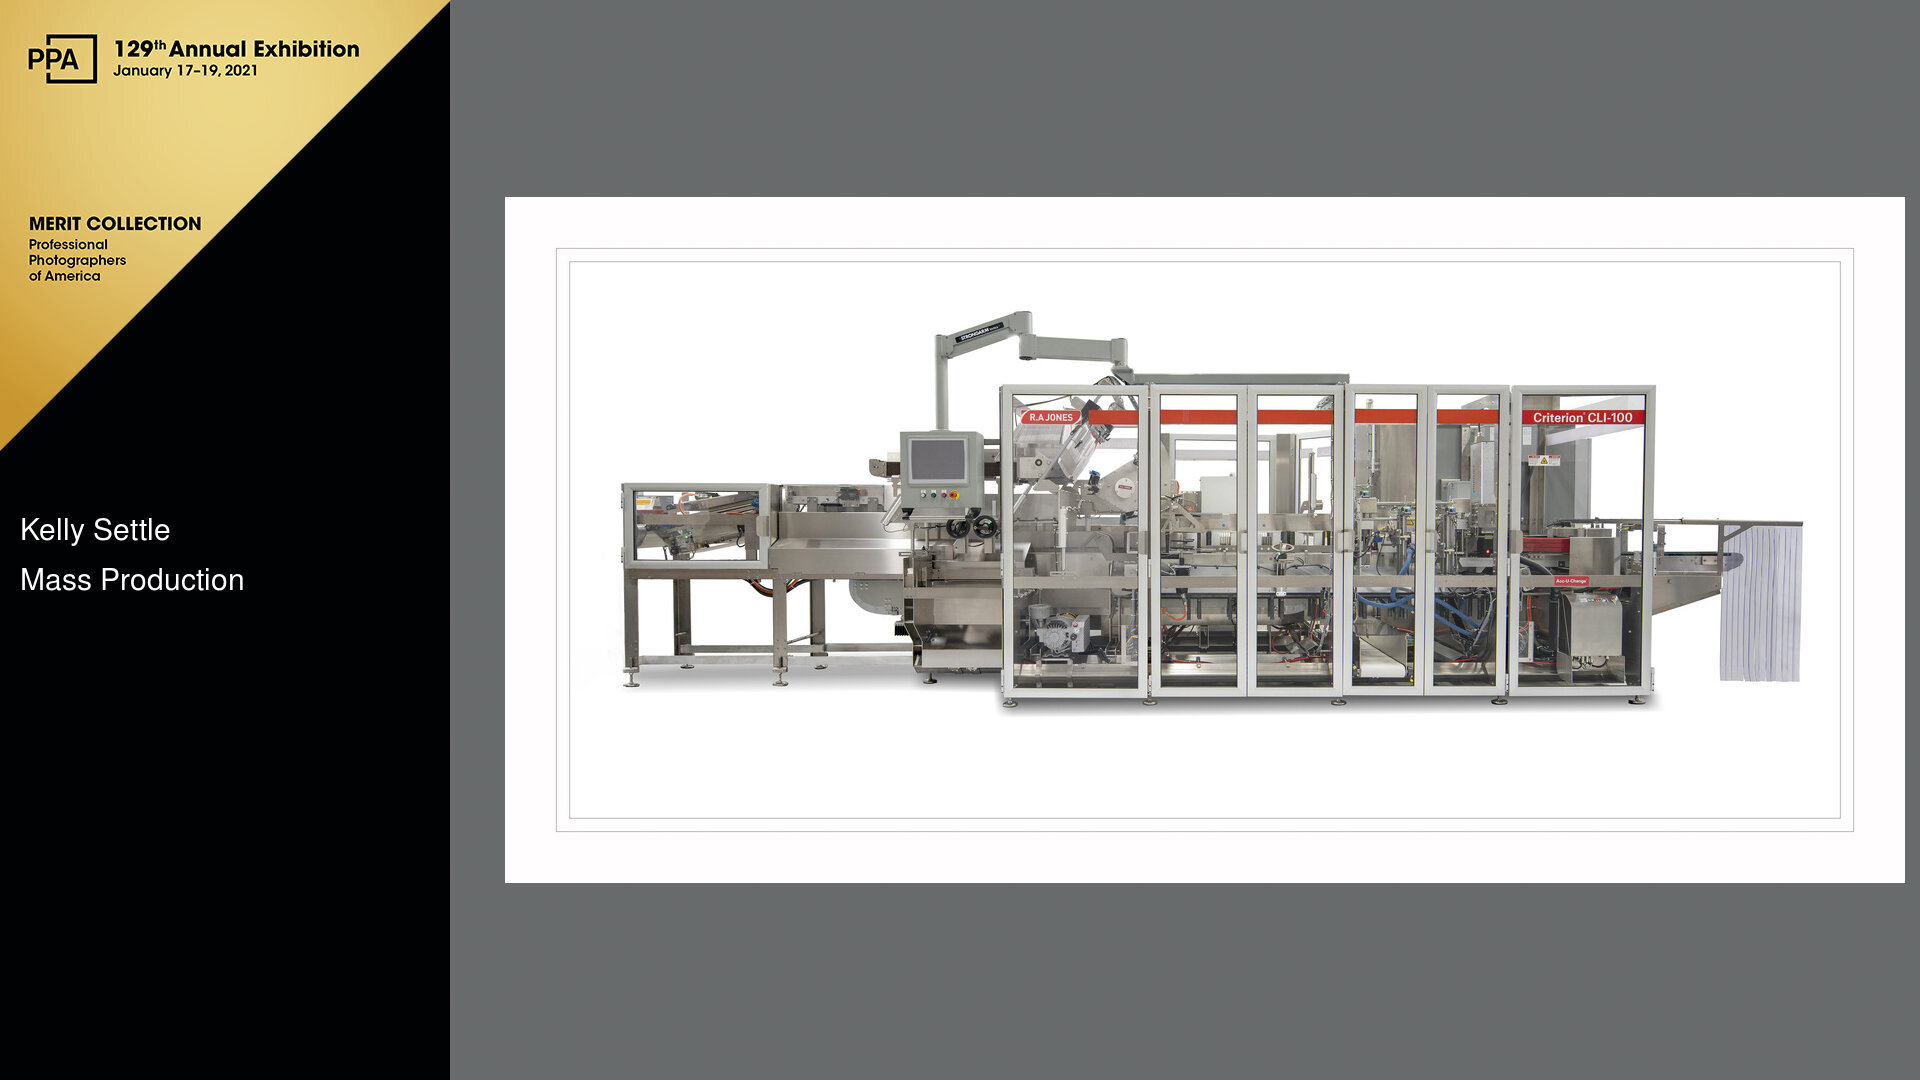 award image industrial manufacturing machine production commercial photograph